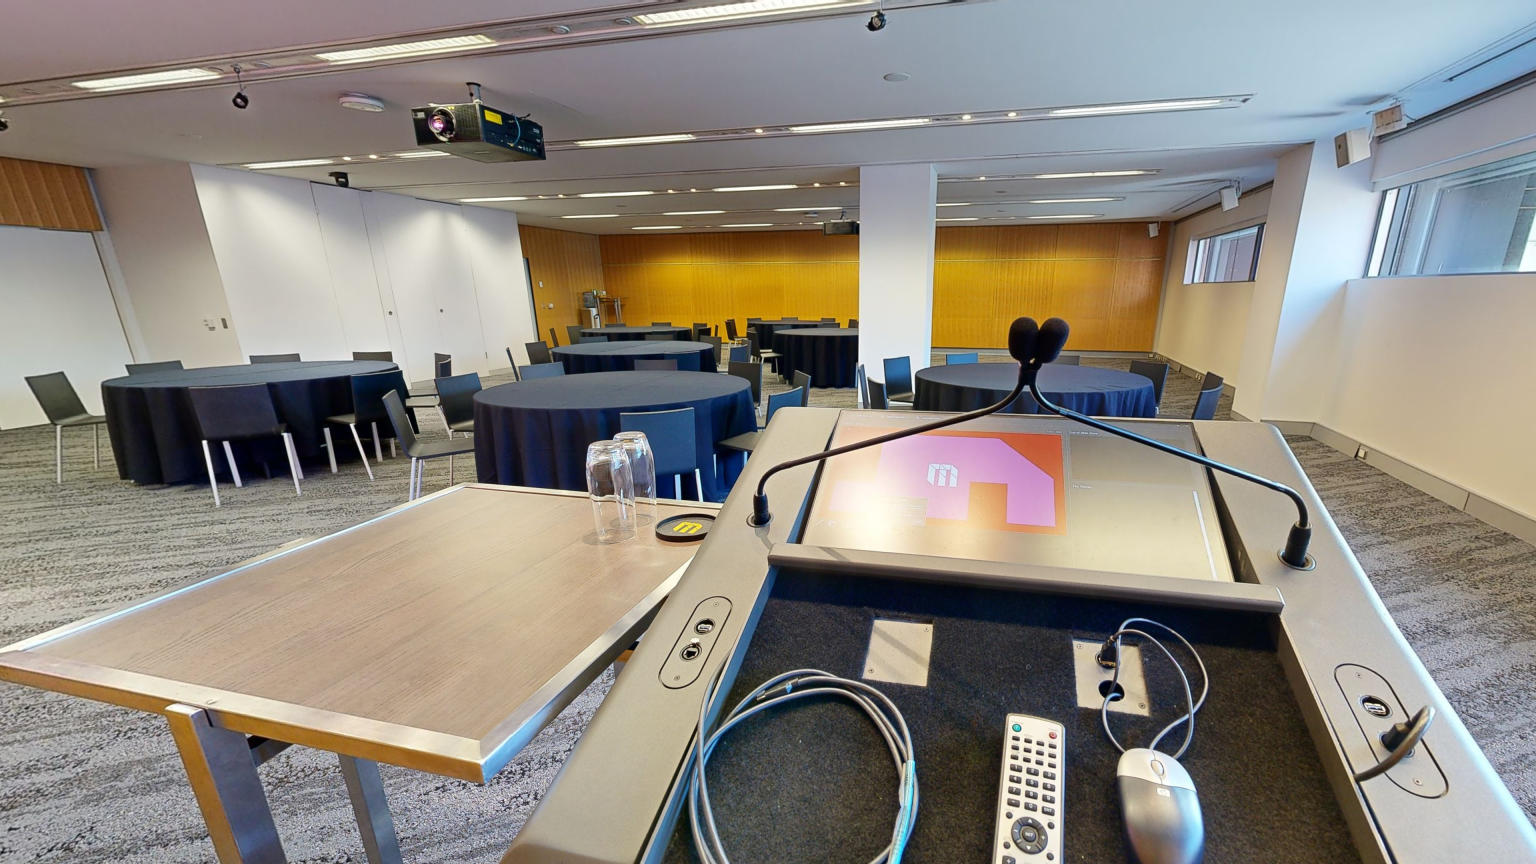 A conference or meeting room with arranged round tables and chairs for meetings or discussions. The tables focus around facing a lectern at the front of the room. A strip of windows that sit at eye level run along side one wall. 